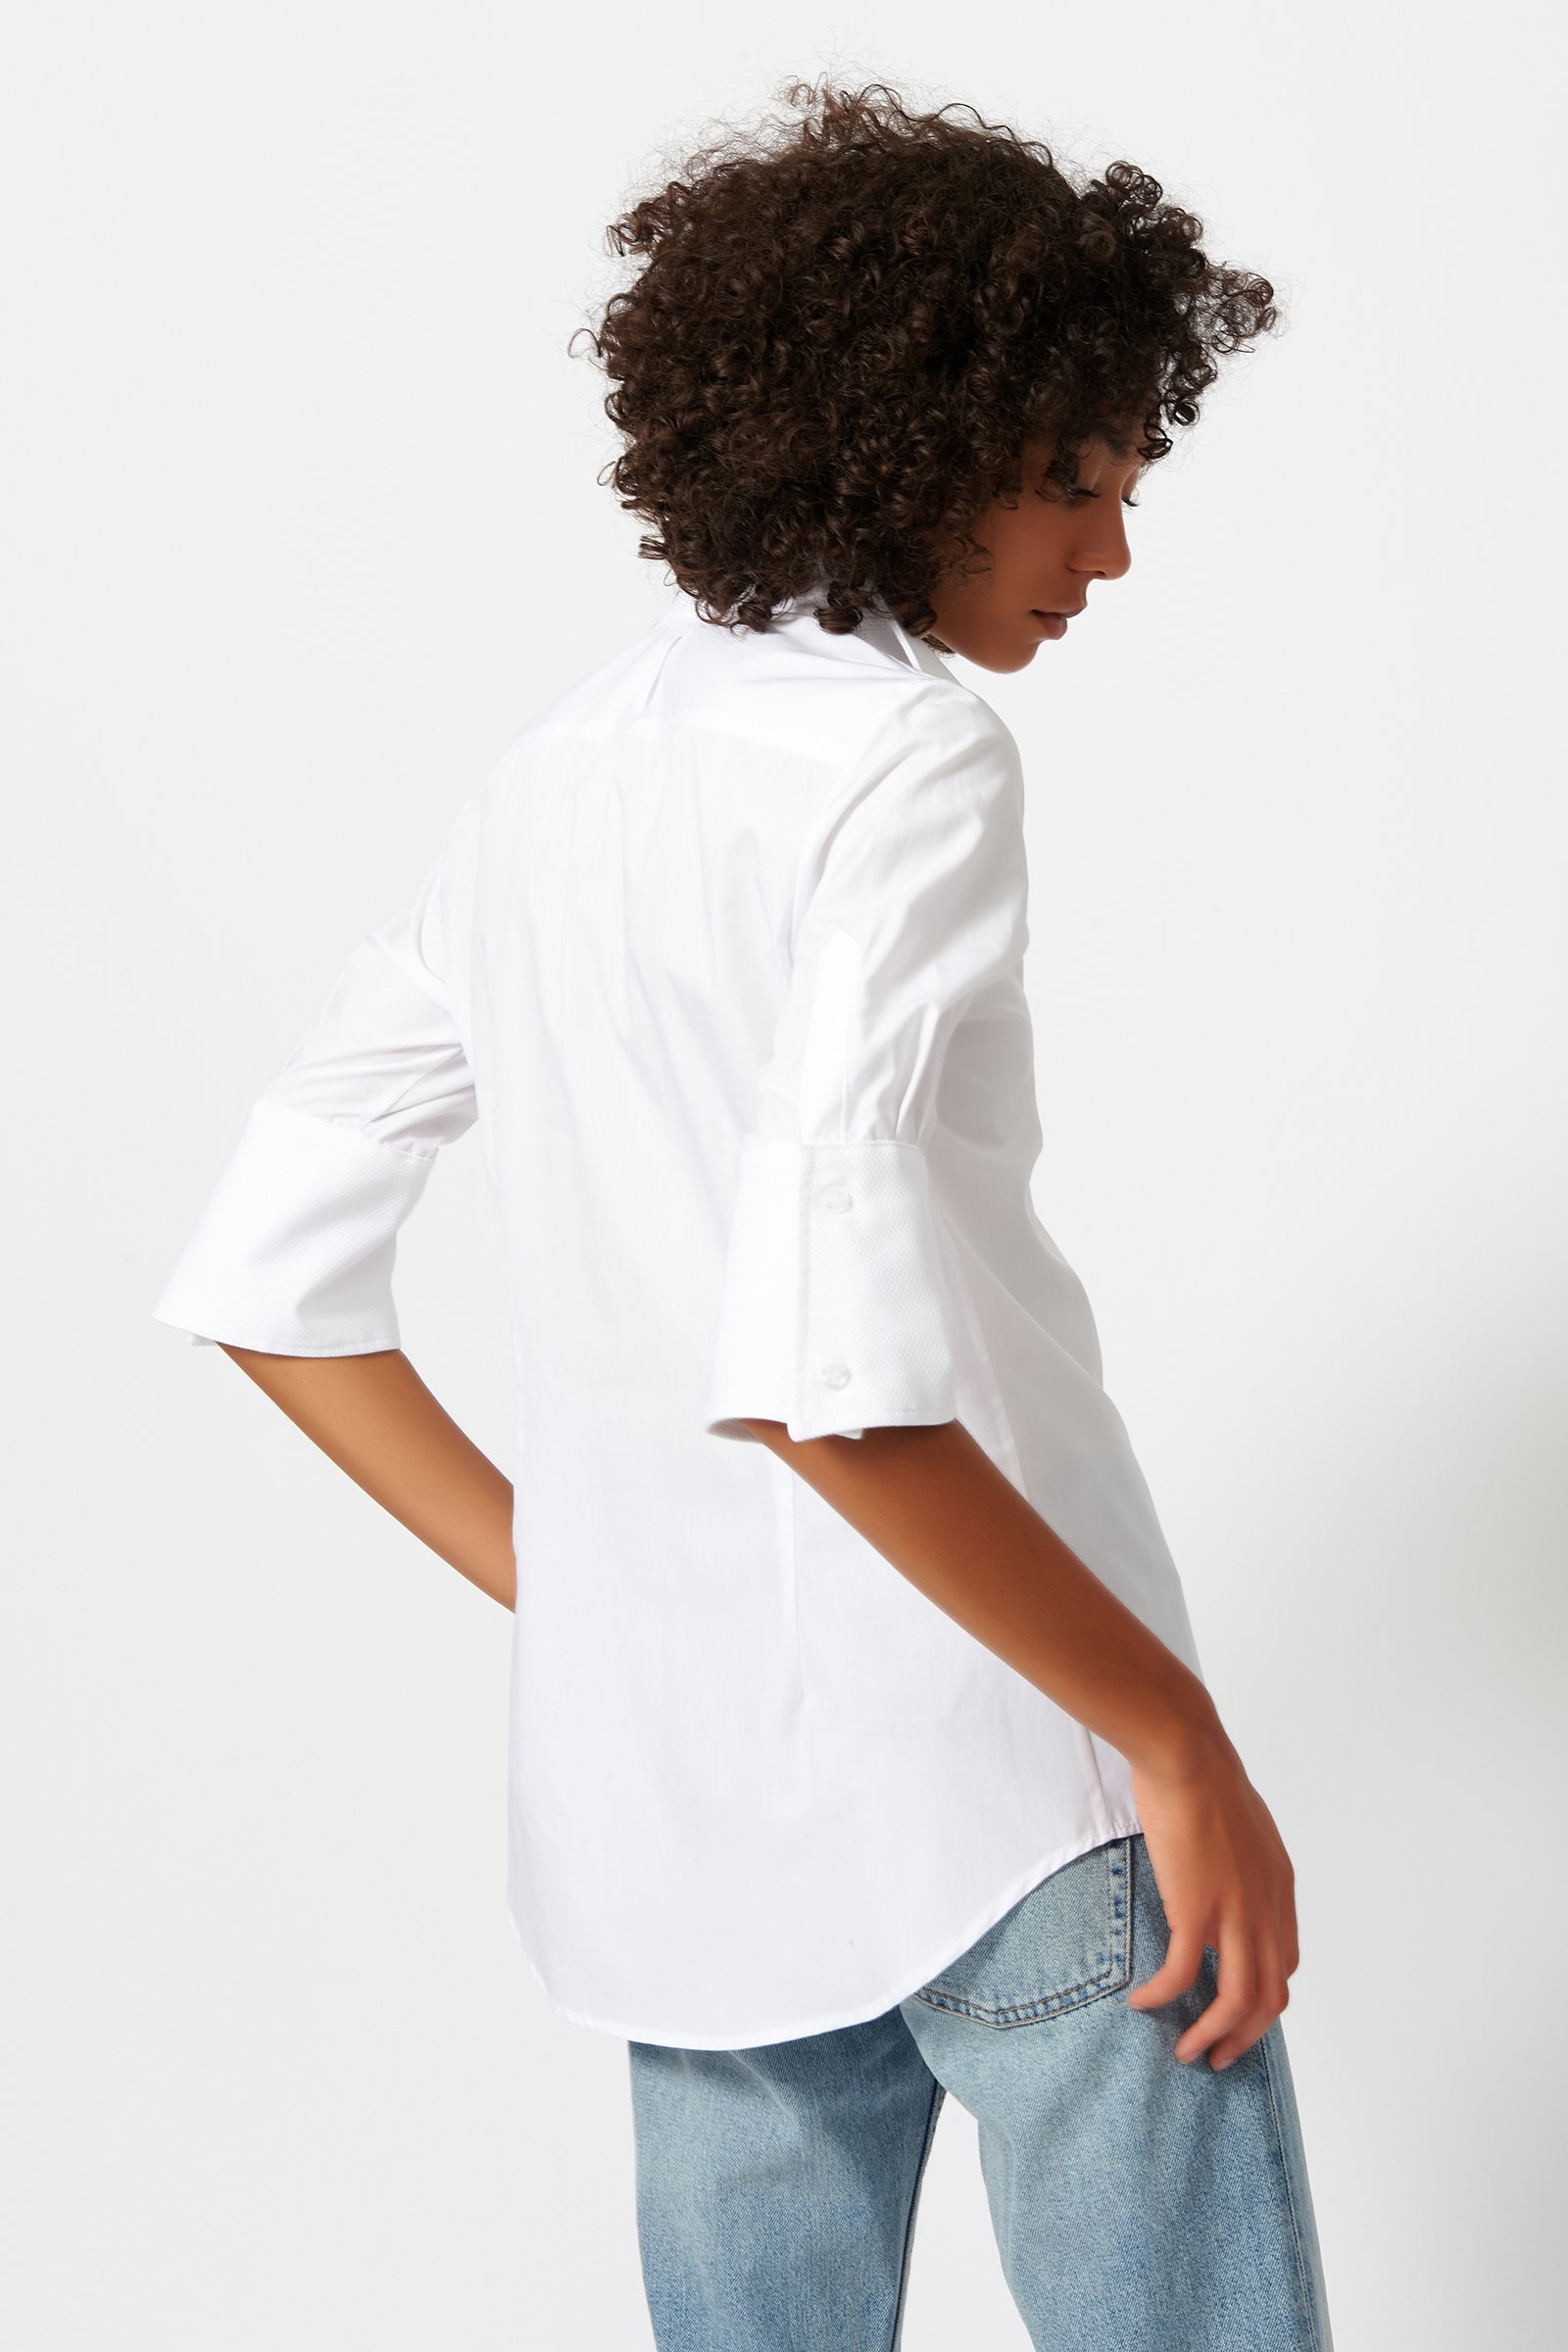 Kal Rieman Double Collar Shirt in White Poplin with Pique on Model Front View